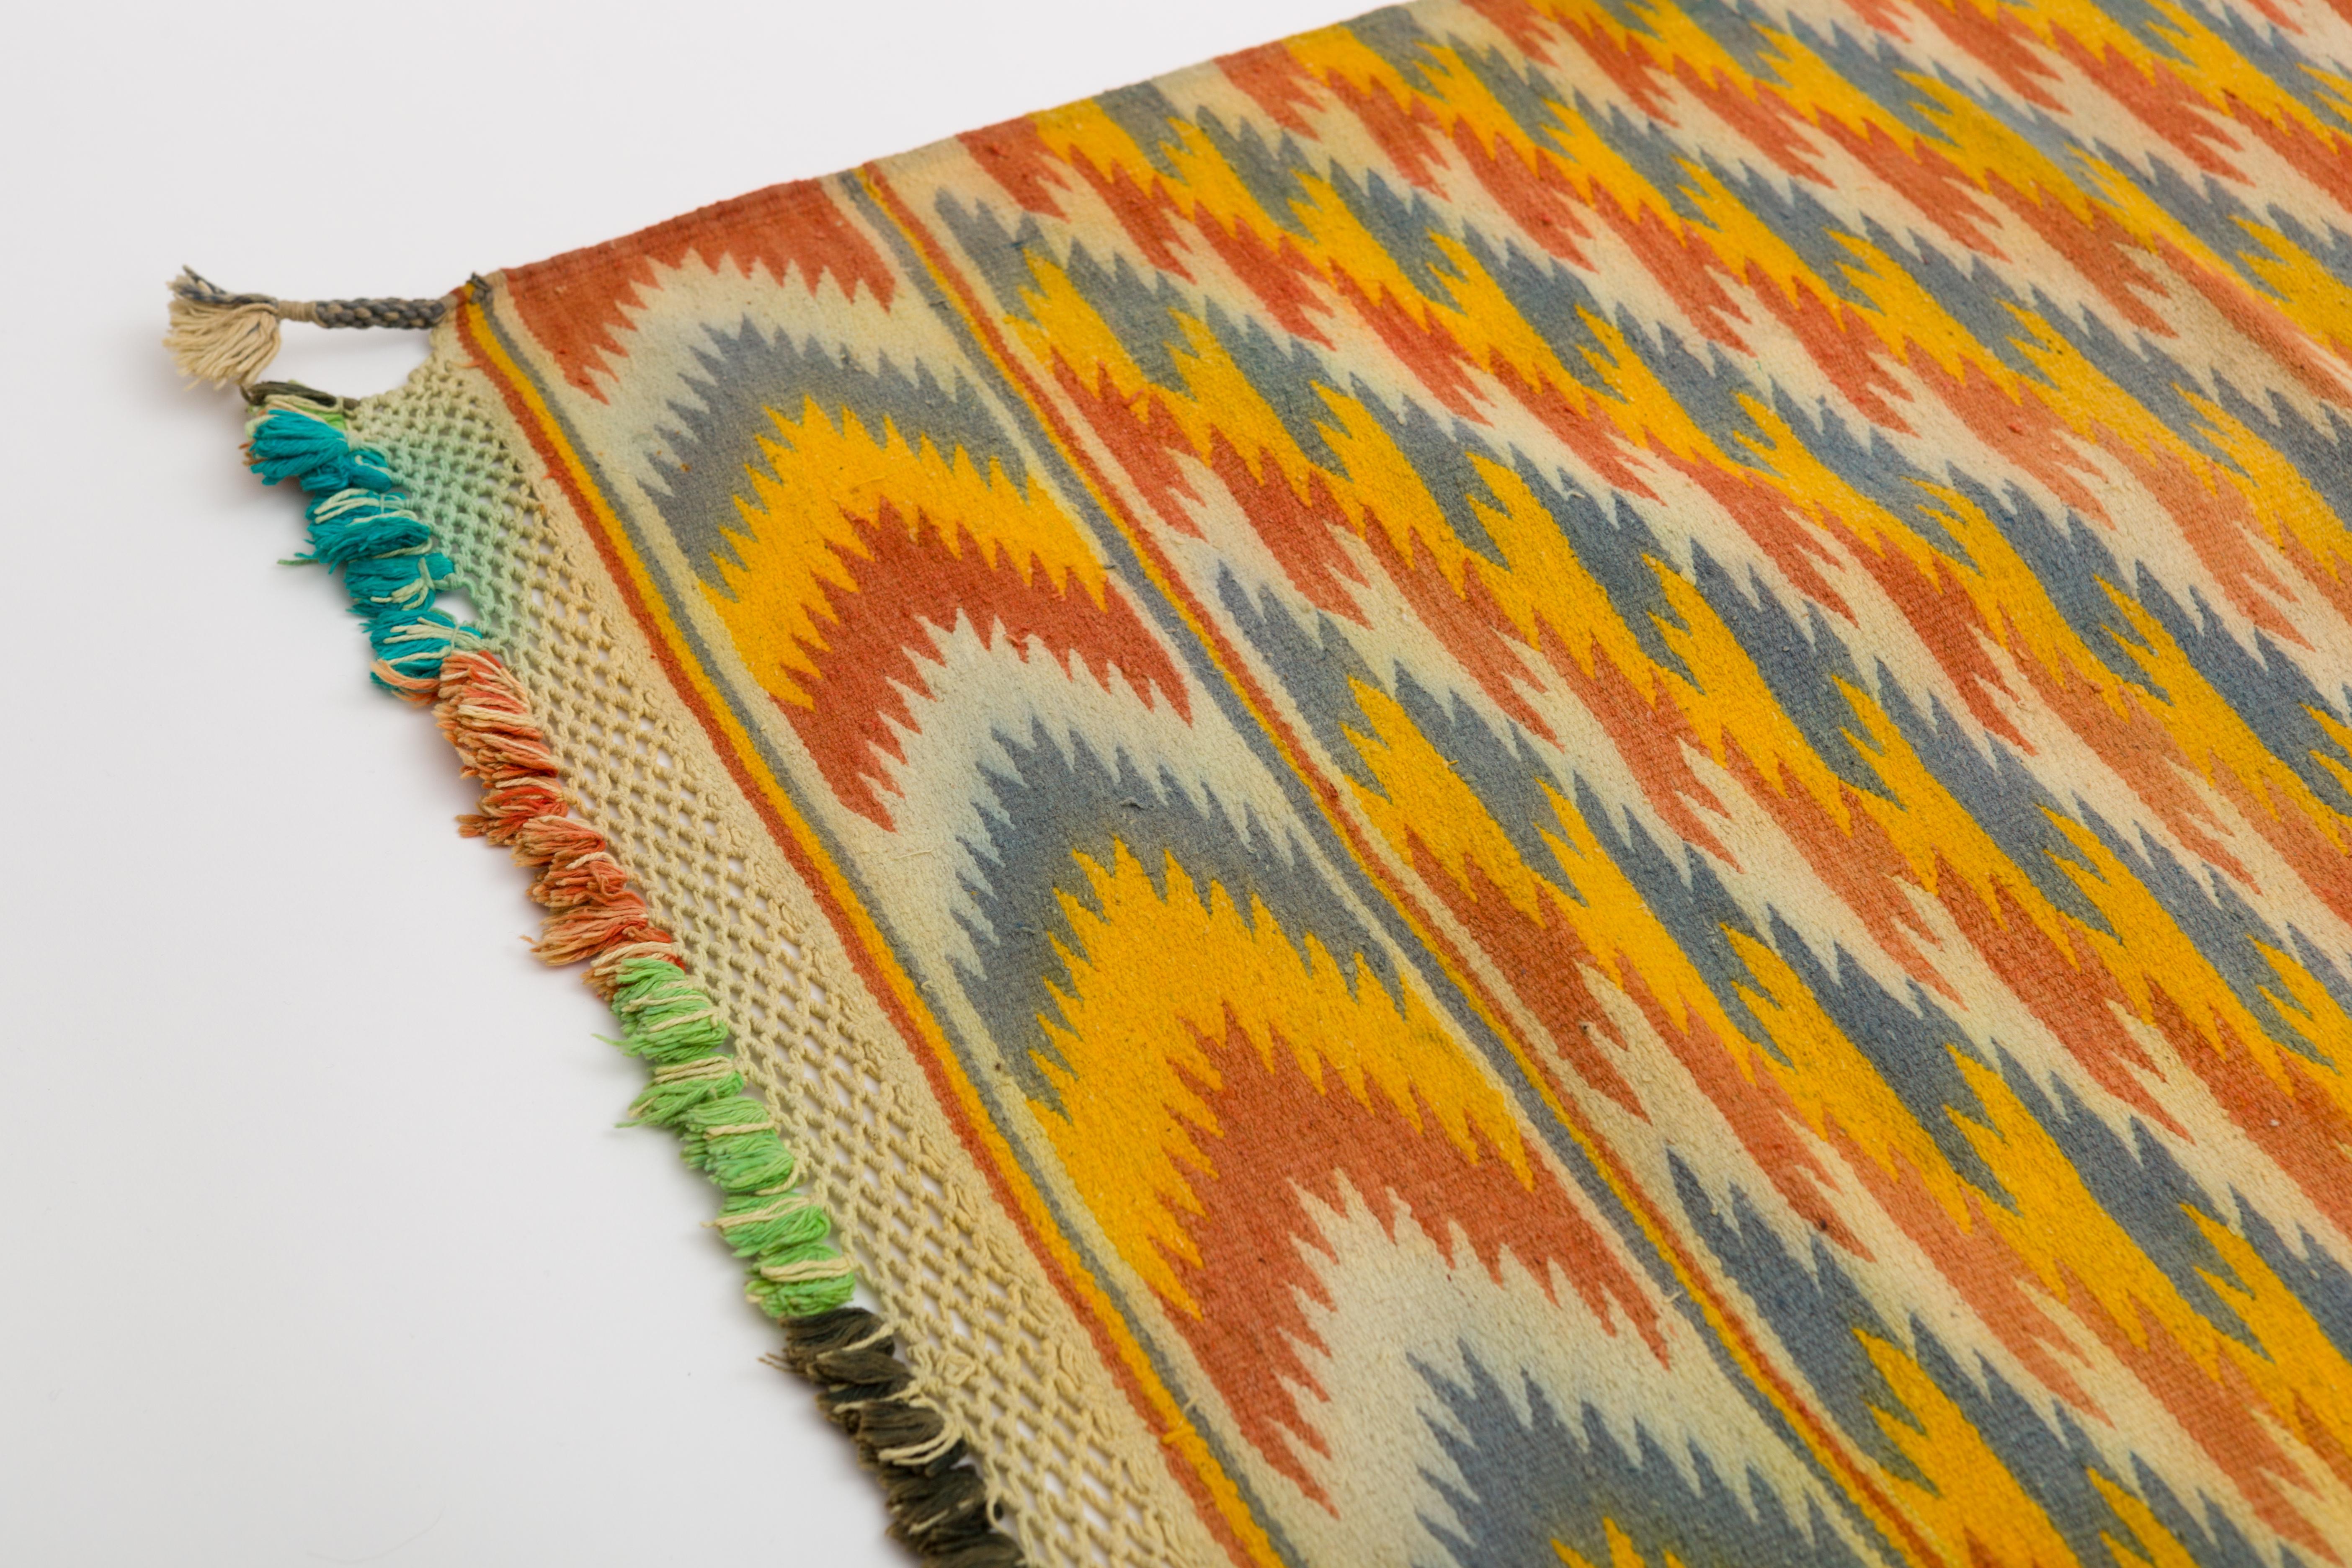 Handwoven cotton tribal Dhurrie rug with bright yellow red and blue optic pattern. Hand knotted fringe on both ends. Rajasthan, India, c. 1950's